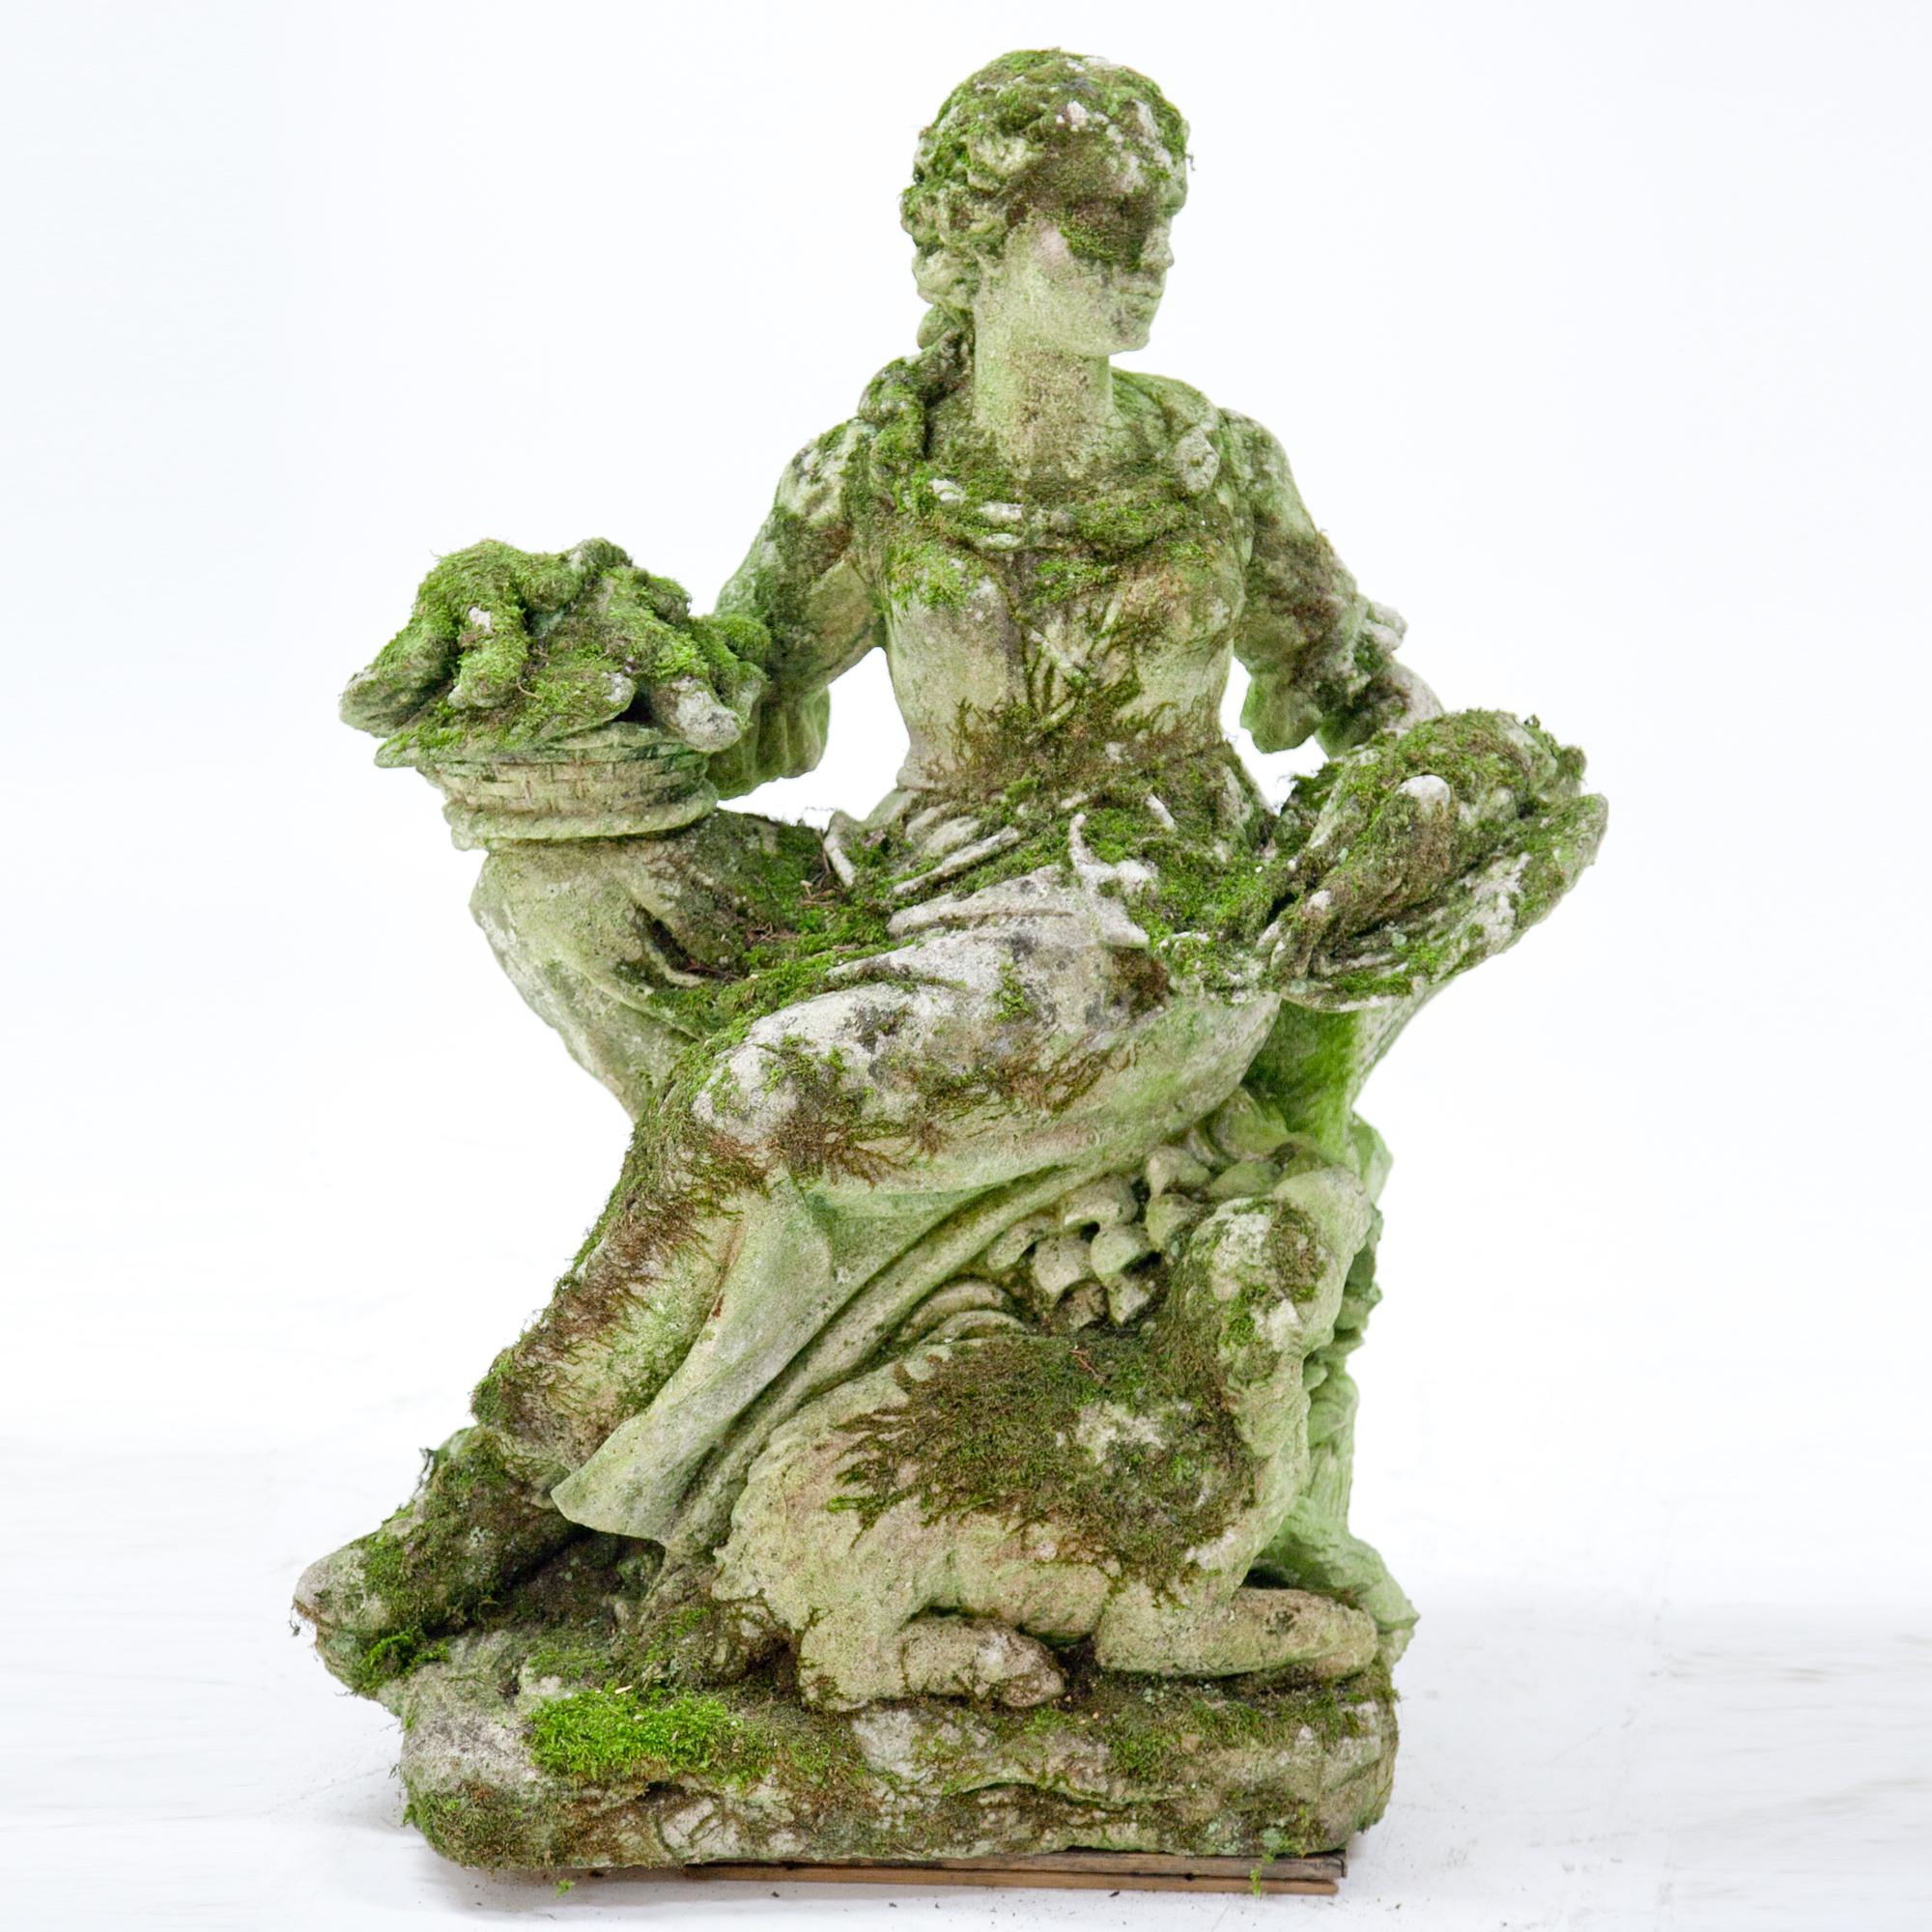 Italian pastoral figure of a poultry seller, seated on a tree trunk, with baskets full of her wares, carved Pietra di Vicenza stone. A lamb nibbles on some grass blades towards her feet. Very detailed carving, partly damaged and weathered.